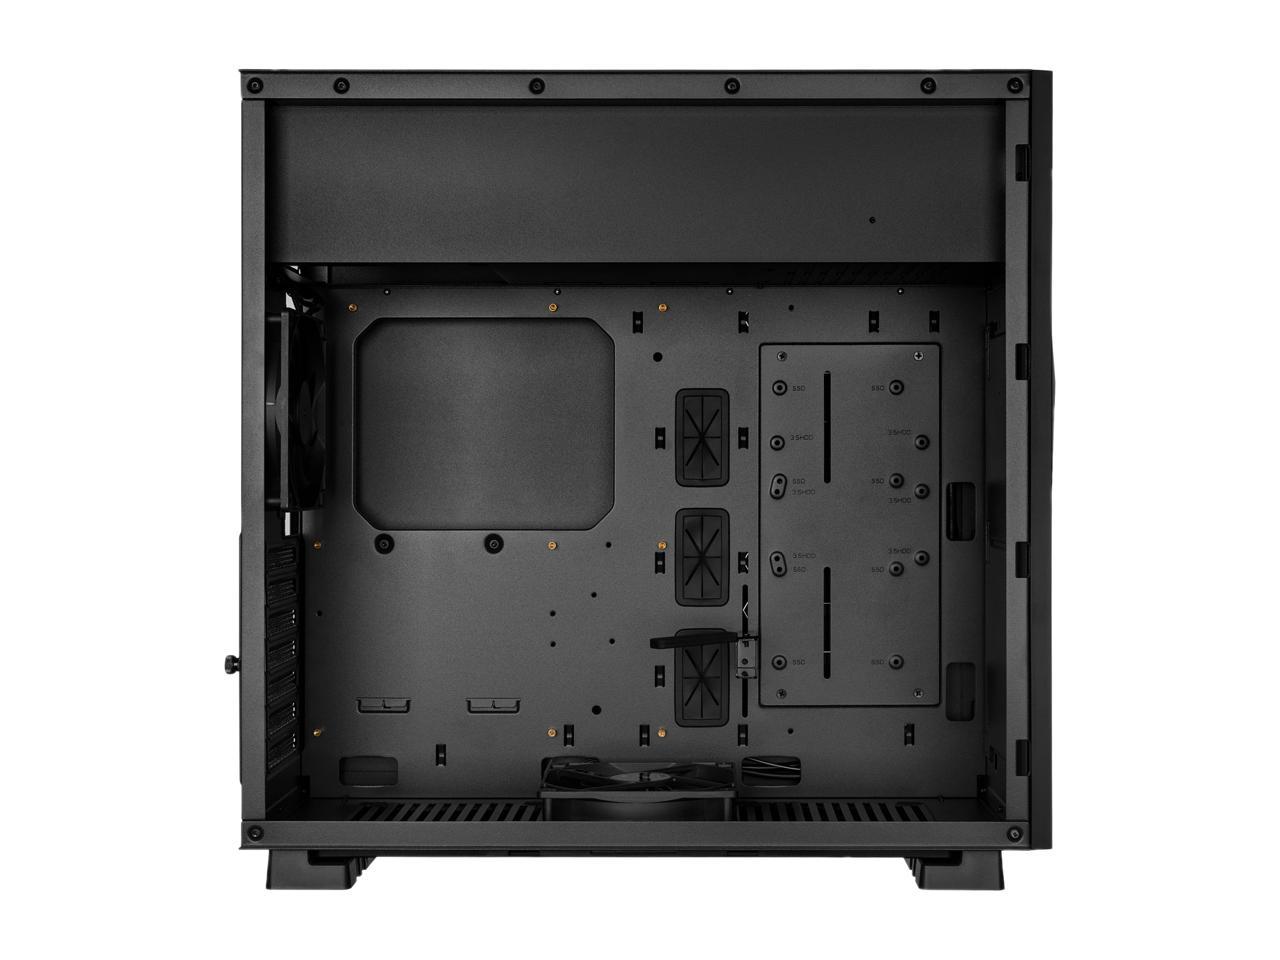 Rosewill ATX Mid Tower Gaming PC Computer Case with 2 x 120mm Fans (Supports up to 6), 240mm AIO Support, EATX Support, Top Mount PSU & HDD/SSD, Tempered Glass & Black Steel - PRISM S-BLACK-LITE